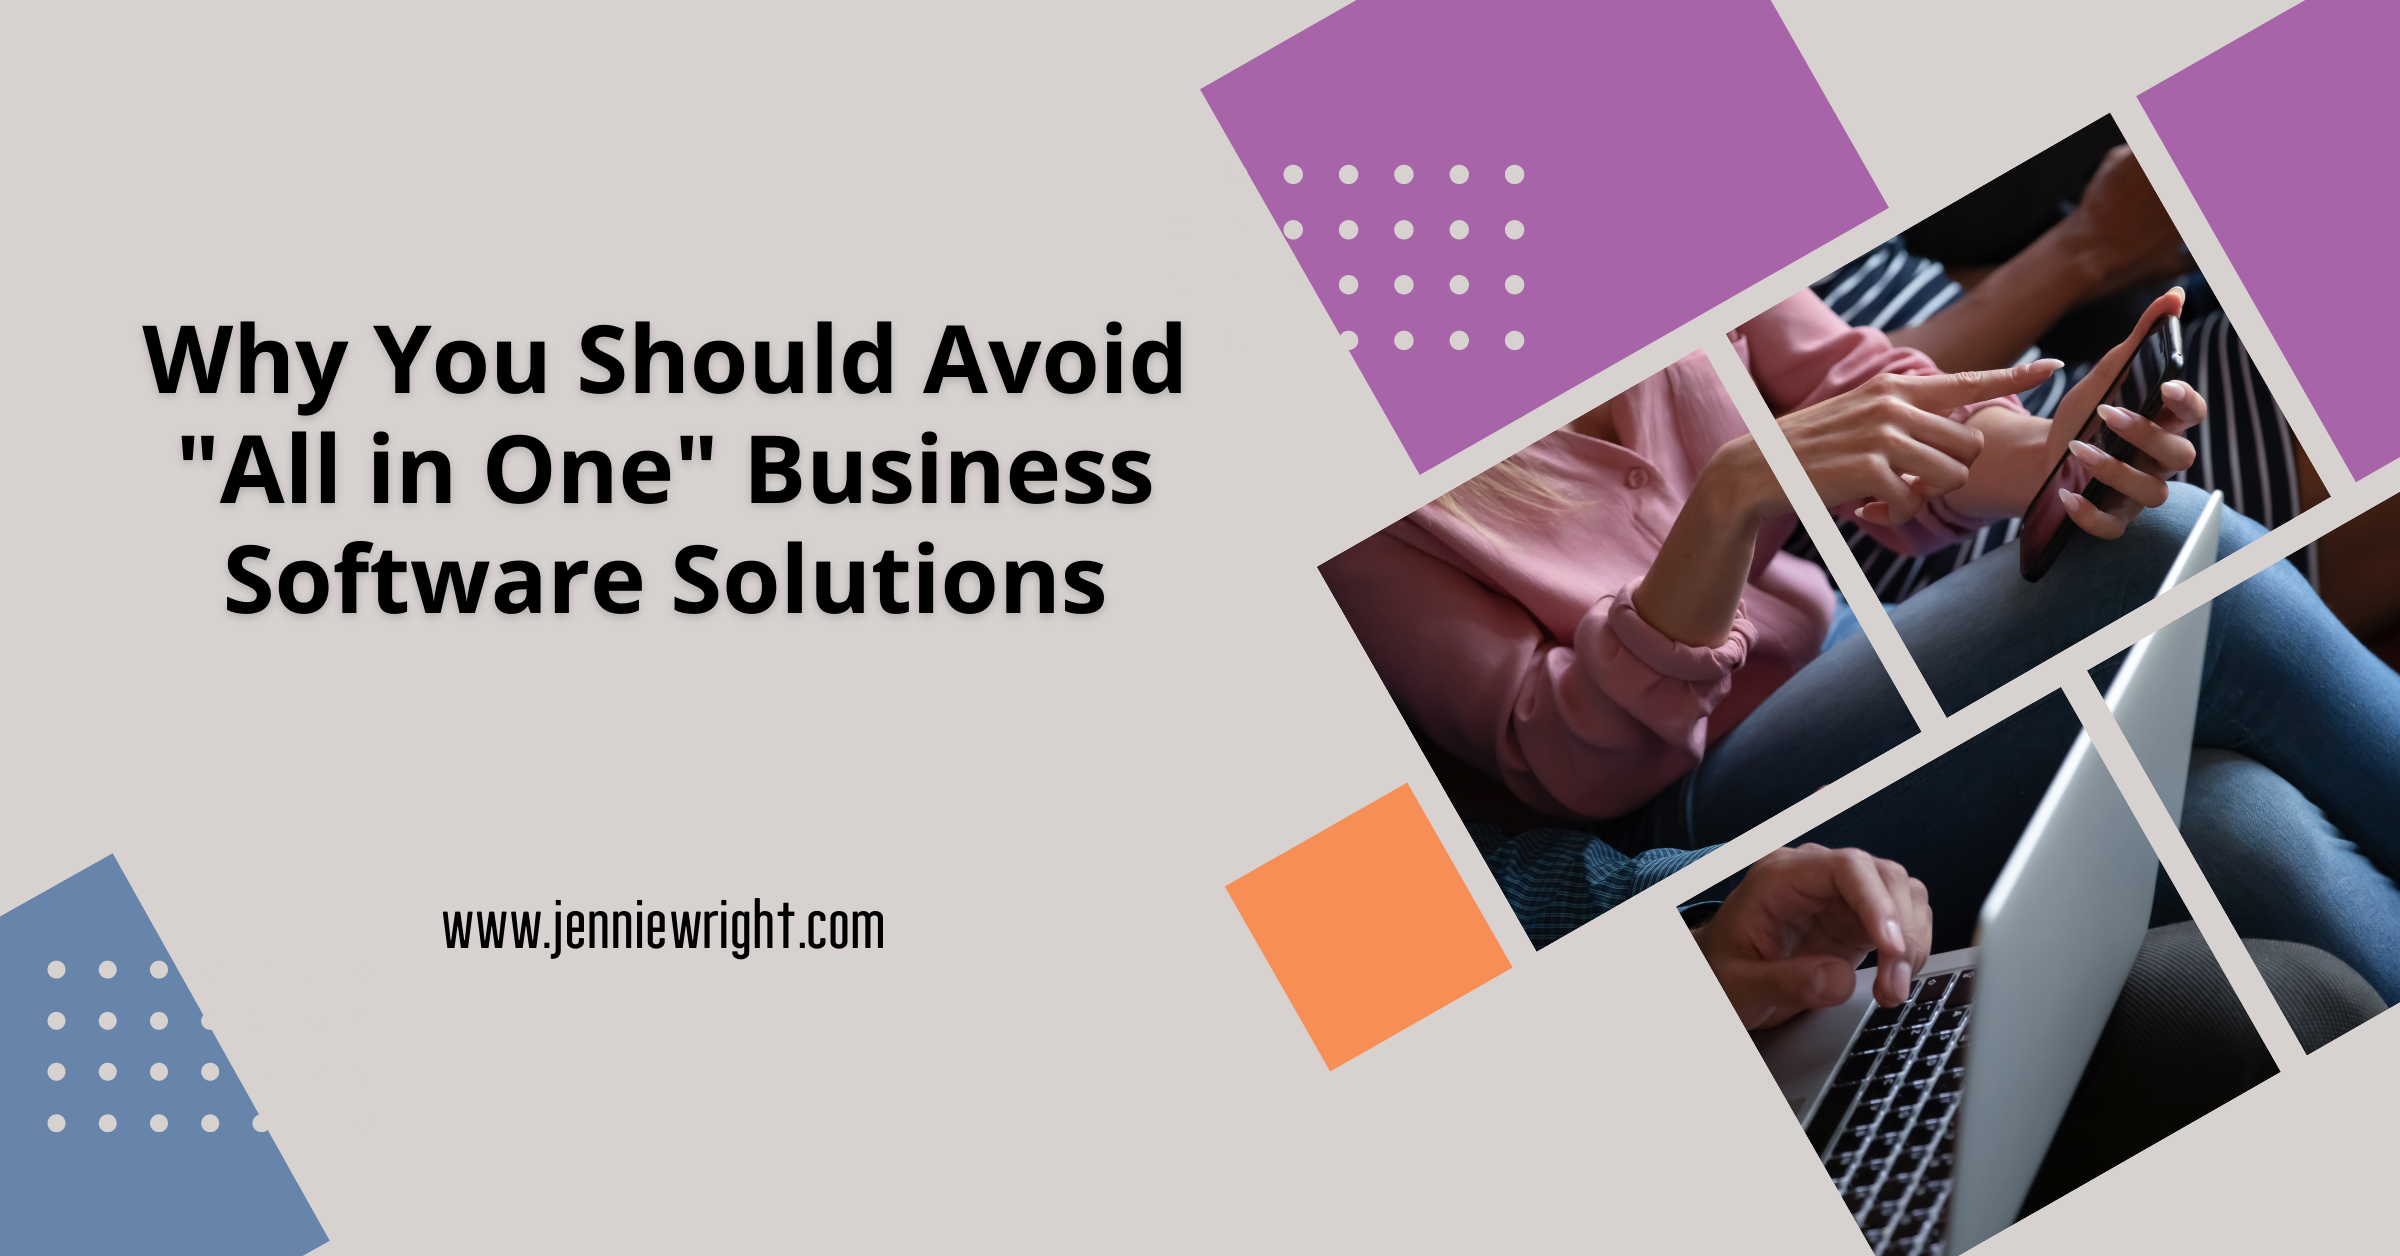 How to Achieve Better Launch Results: Avoid All in One Business Software Solutions